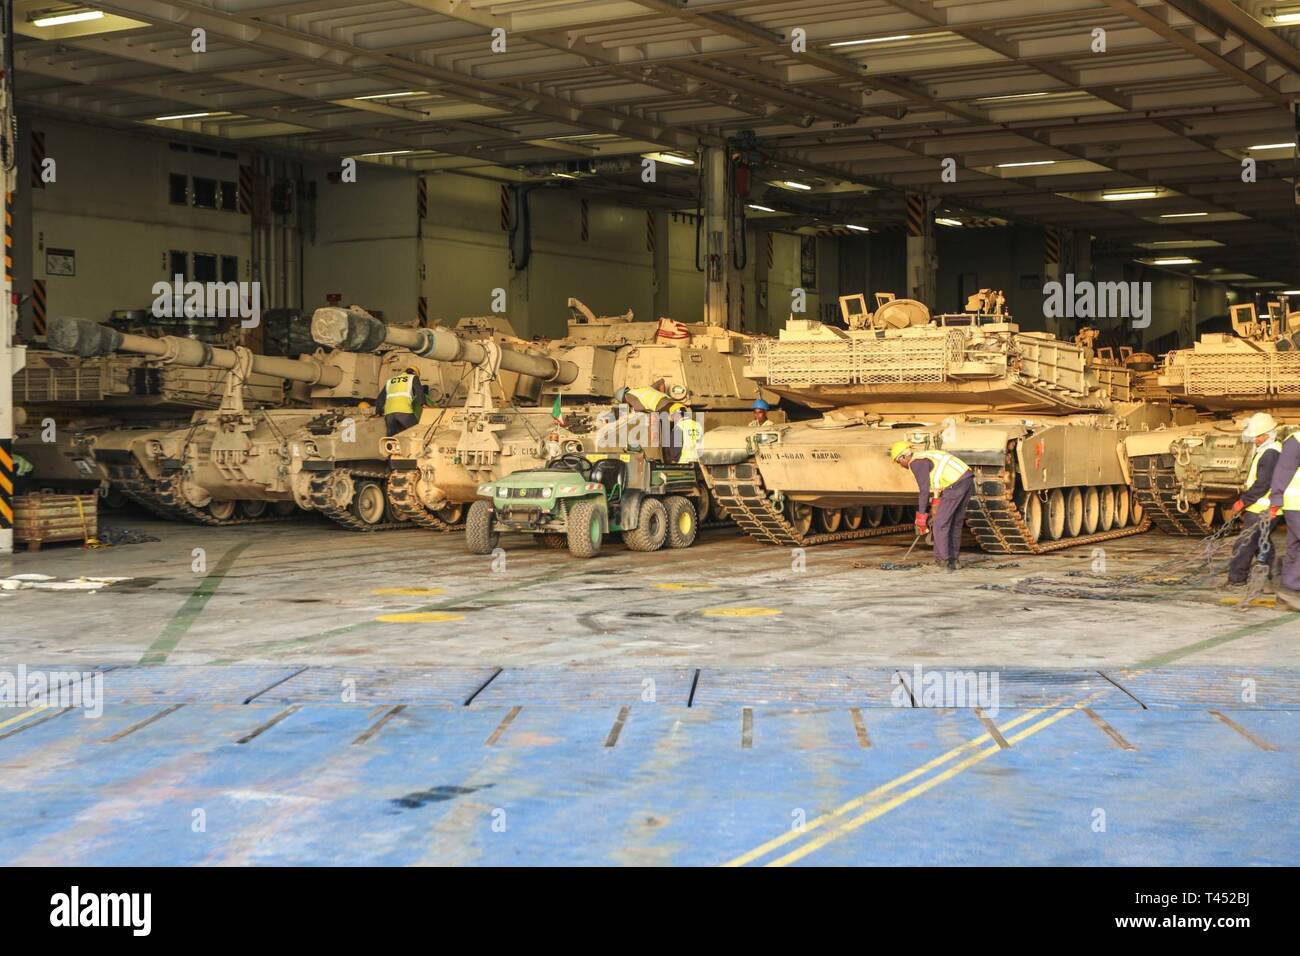 3d Armored Brigade Combat Team, 4th Infantry Division equipment arrives in Kuwait for the brigade's rotation Feb. 27, 2019. Stock Photo